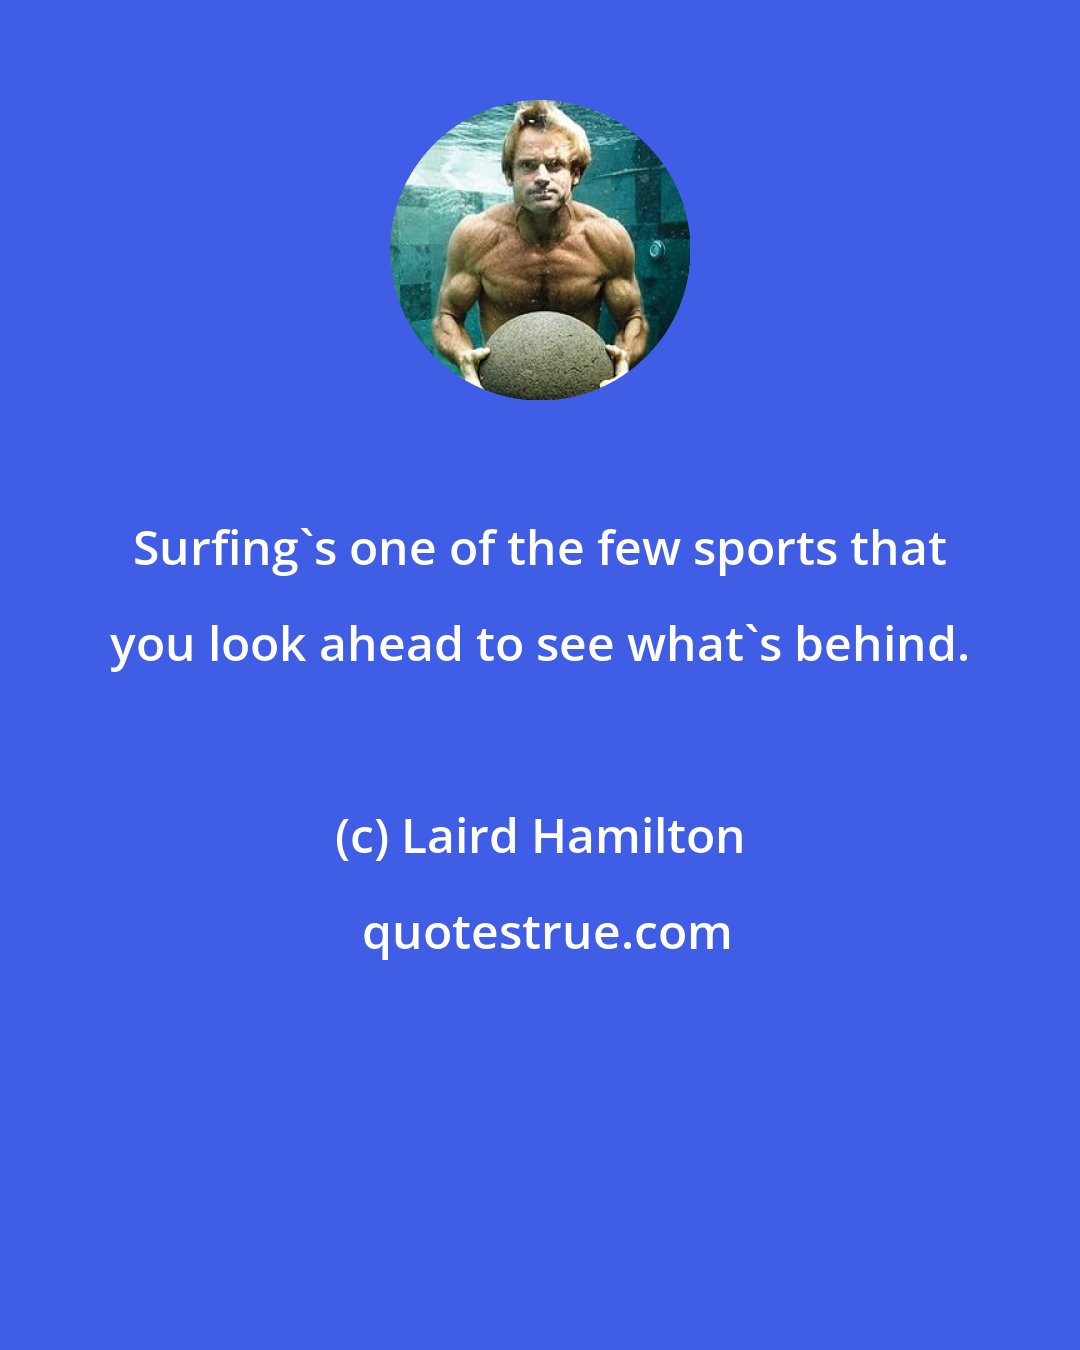 Laird Hamilton: Surfing's one of the few sports that you look ahead to see what's behind.